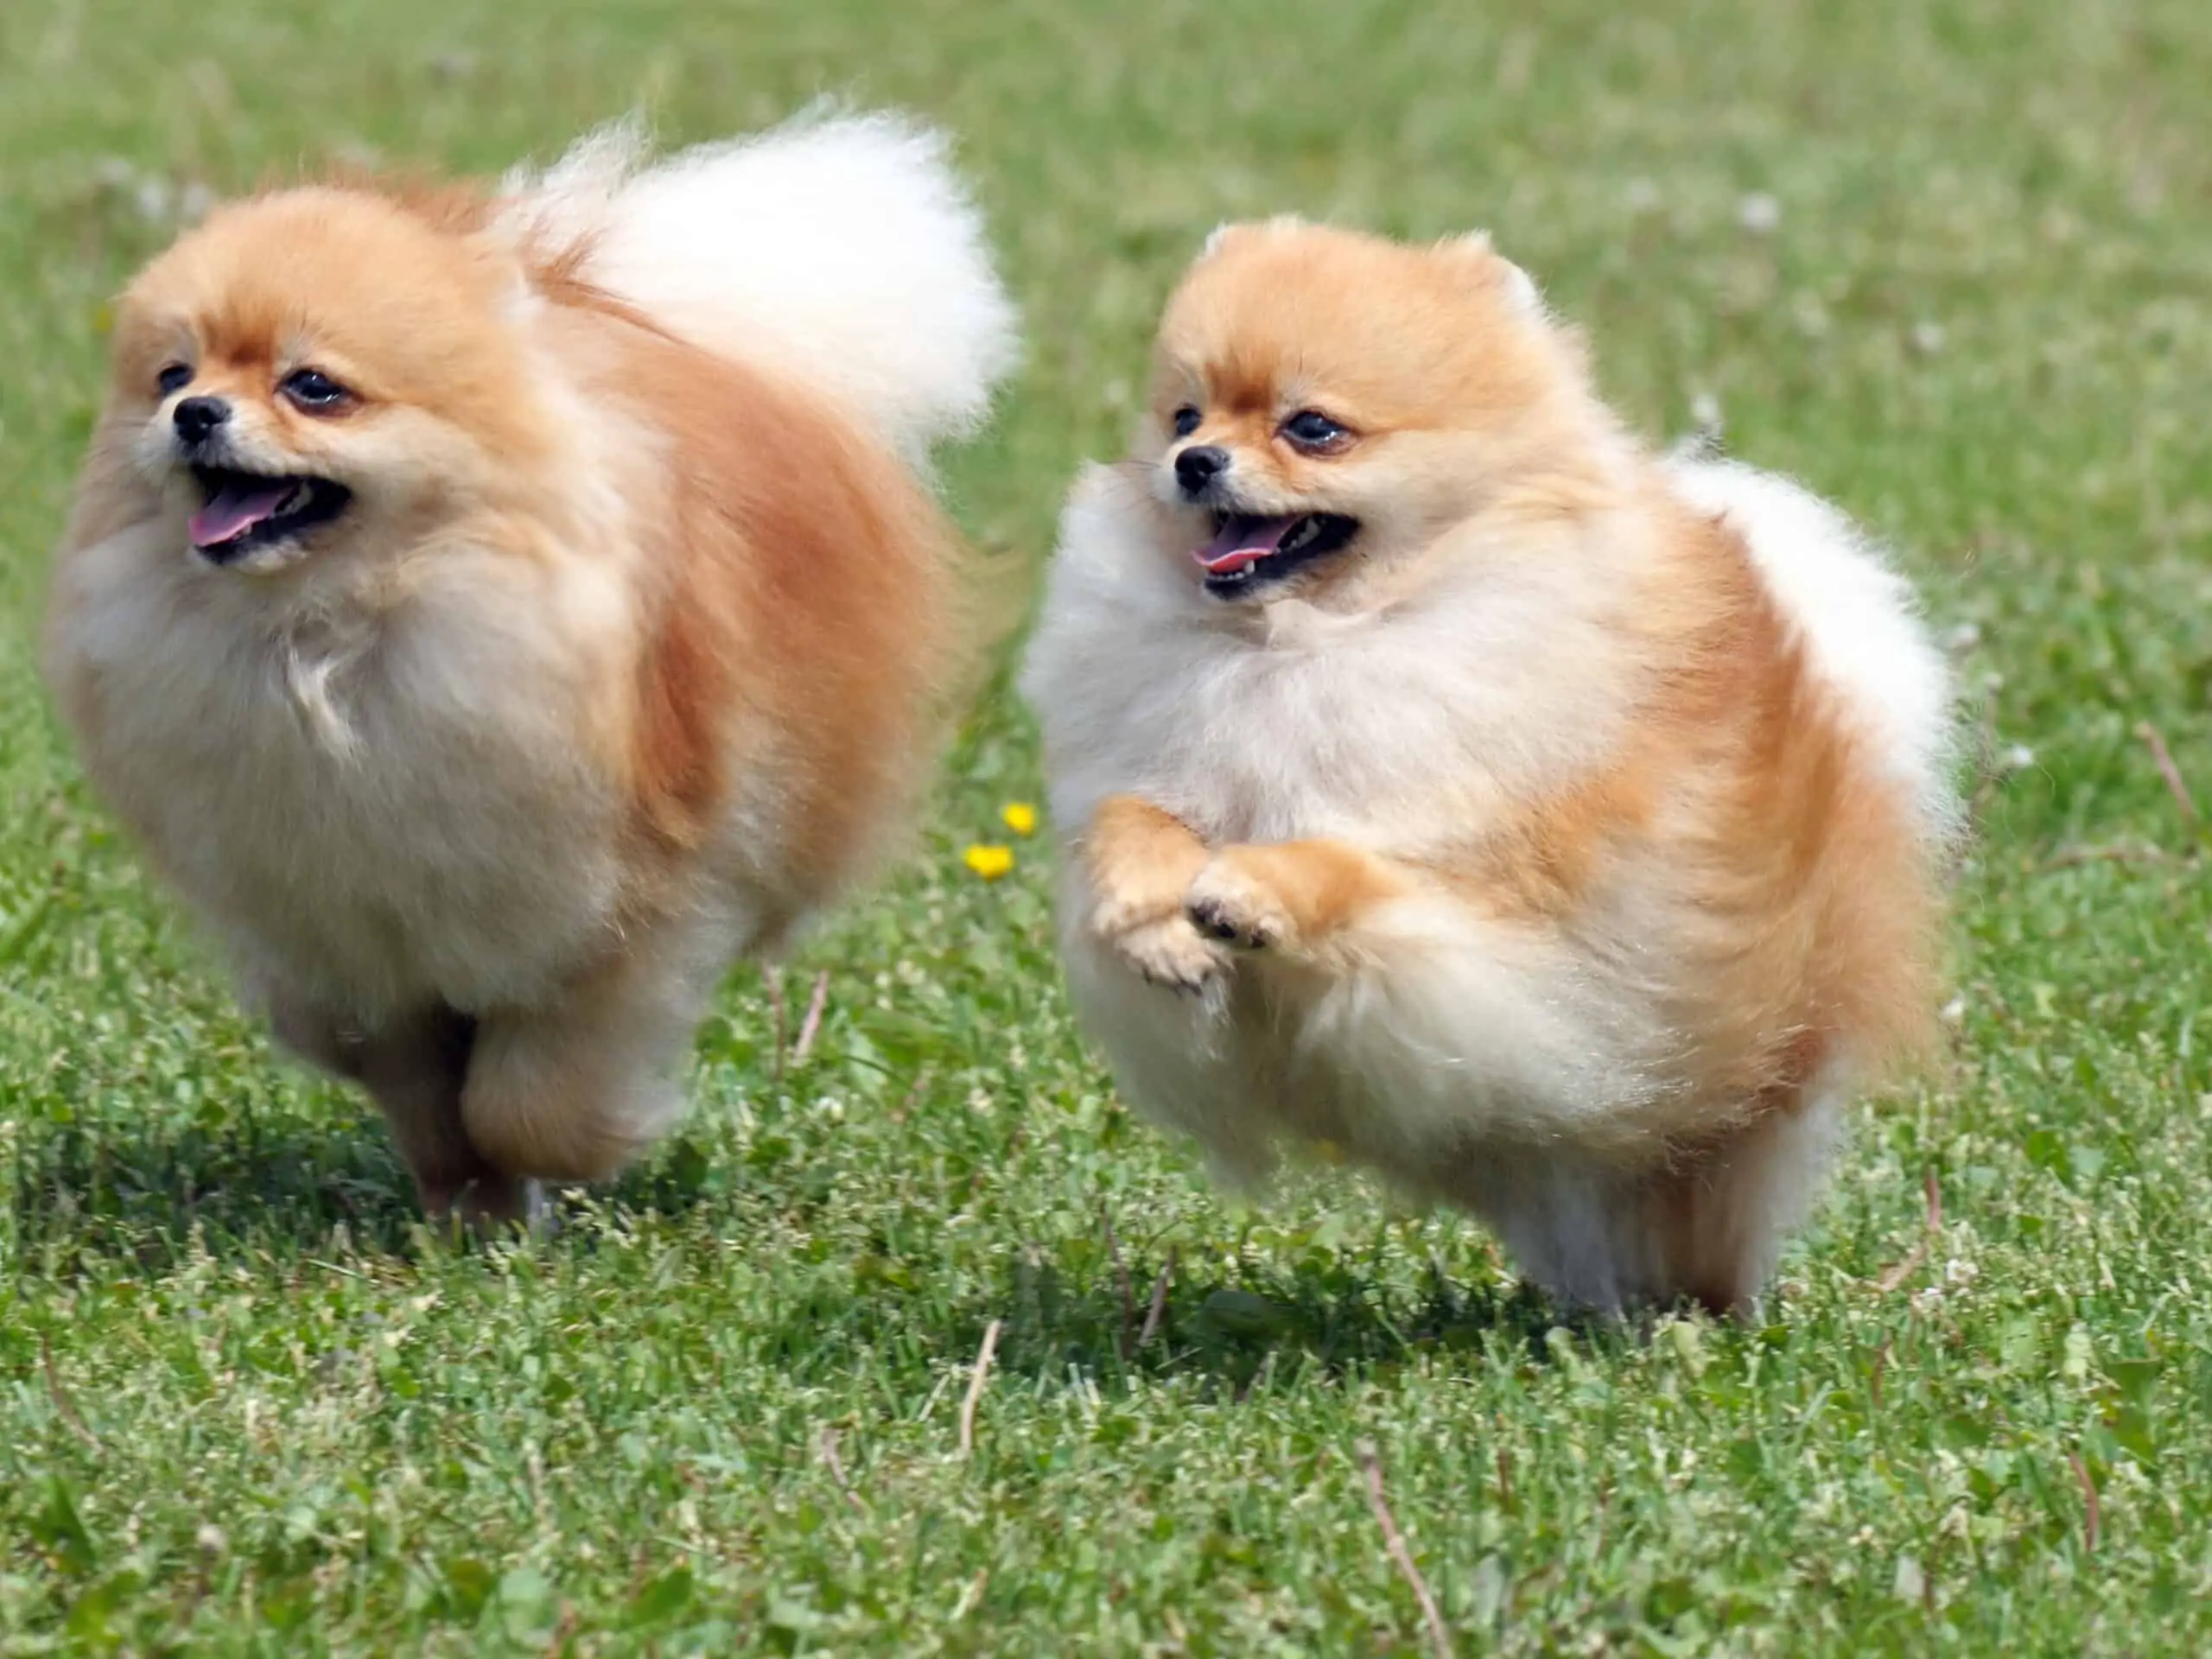 Teacup Pomeranian running happily on the grass